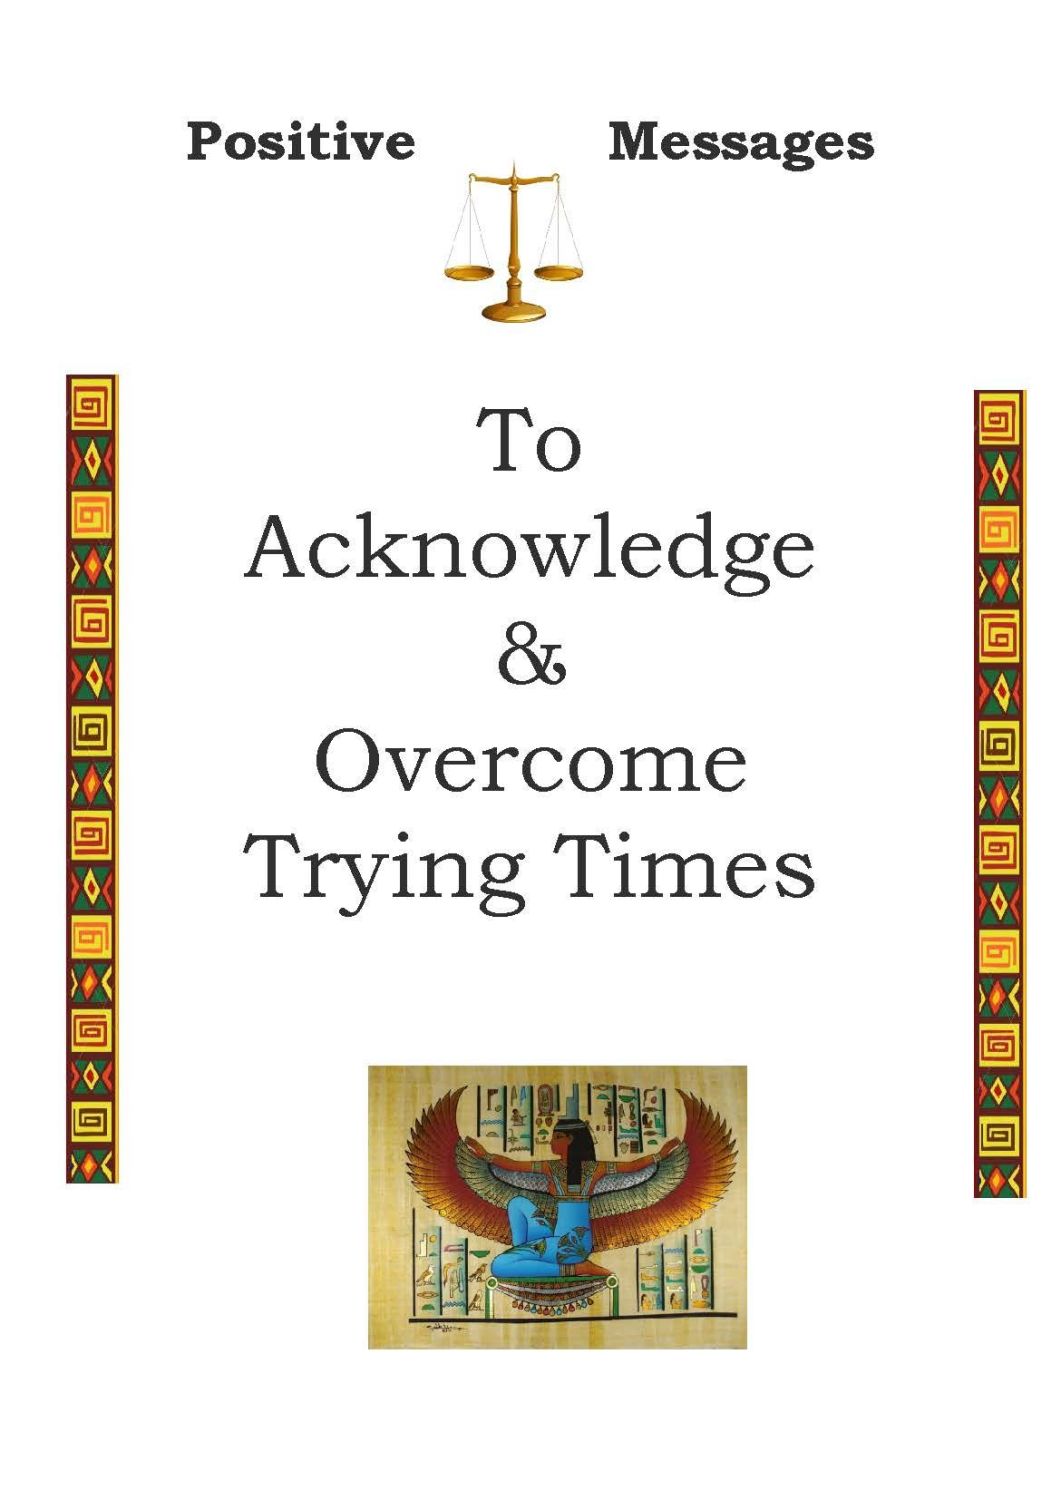 Positive Messages to Acknowledge & Overcome trying times